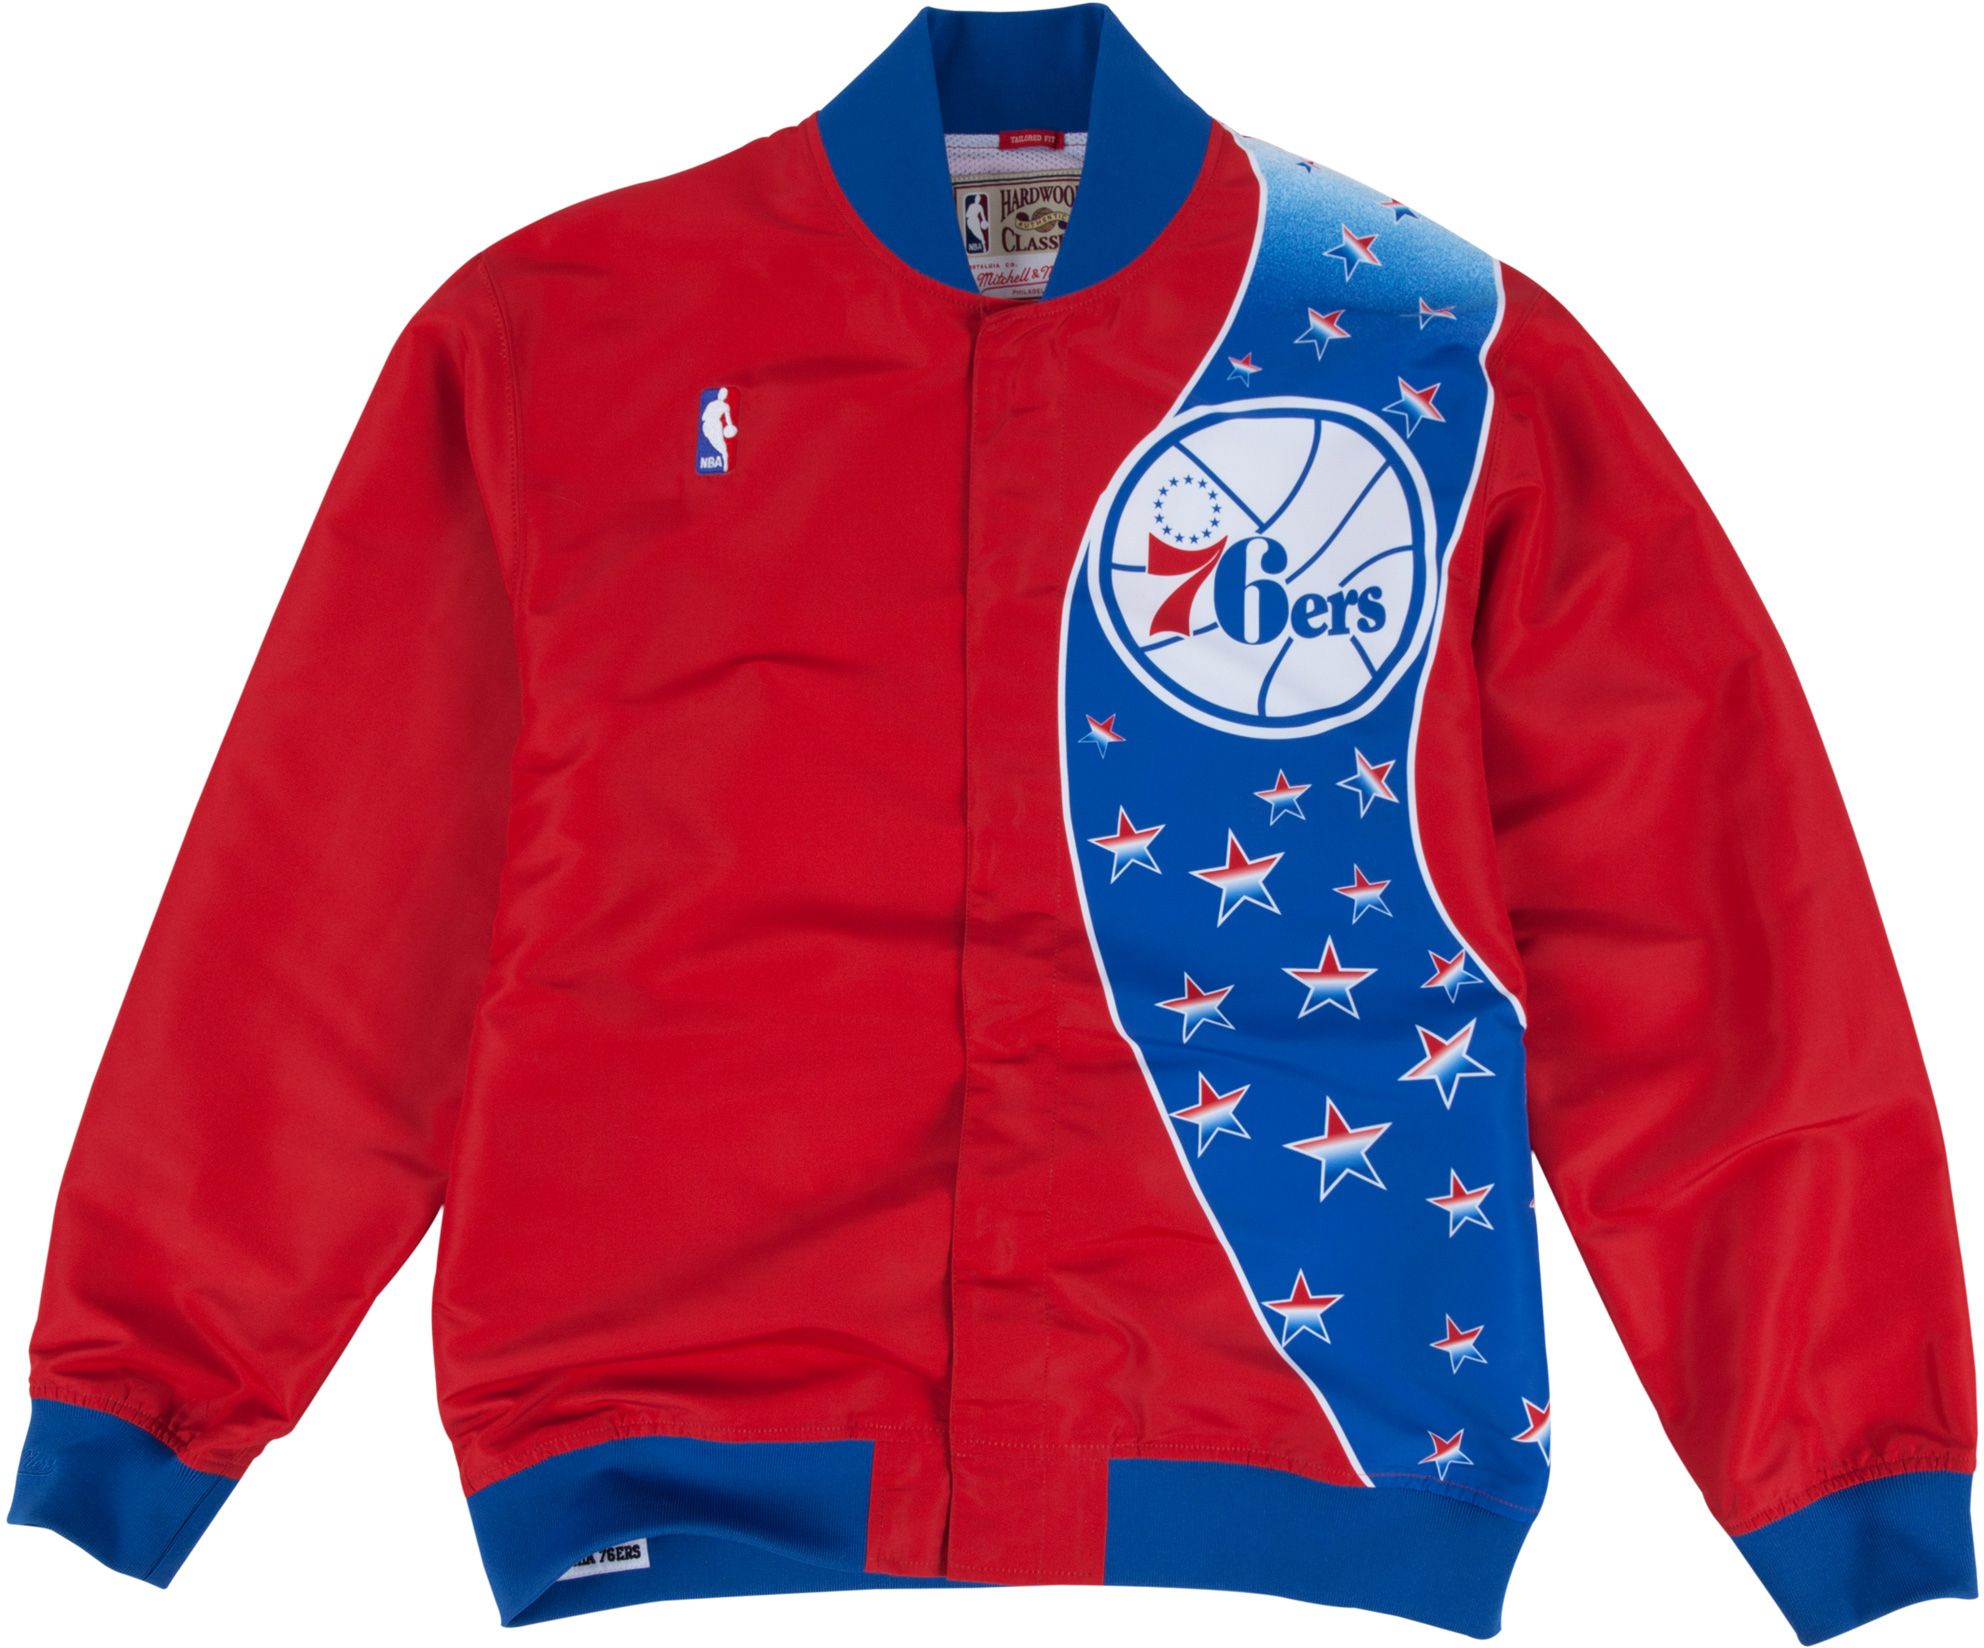 mitchell and ness 76ers jacket